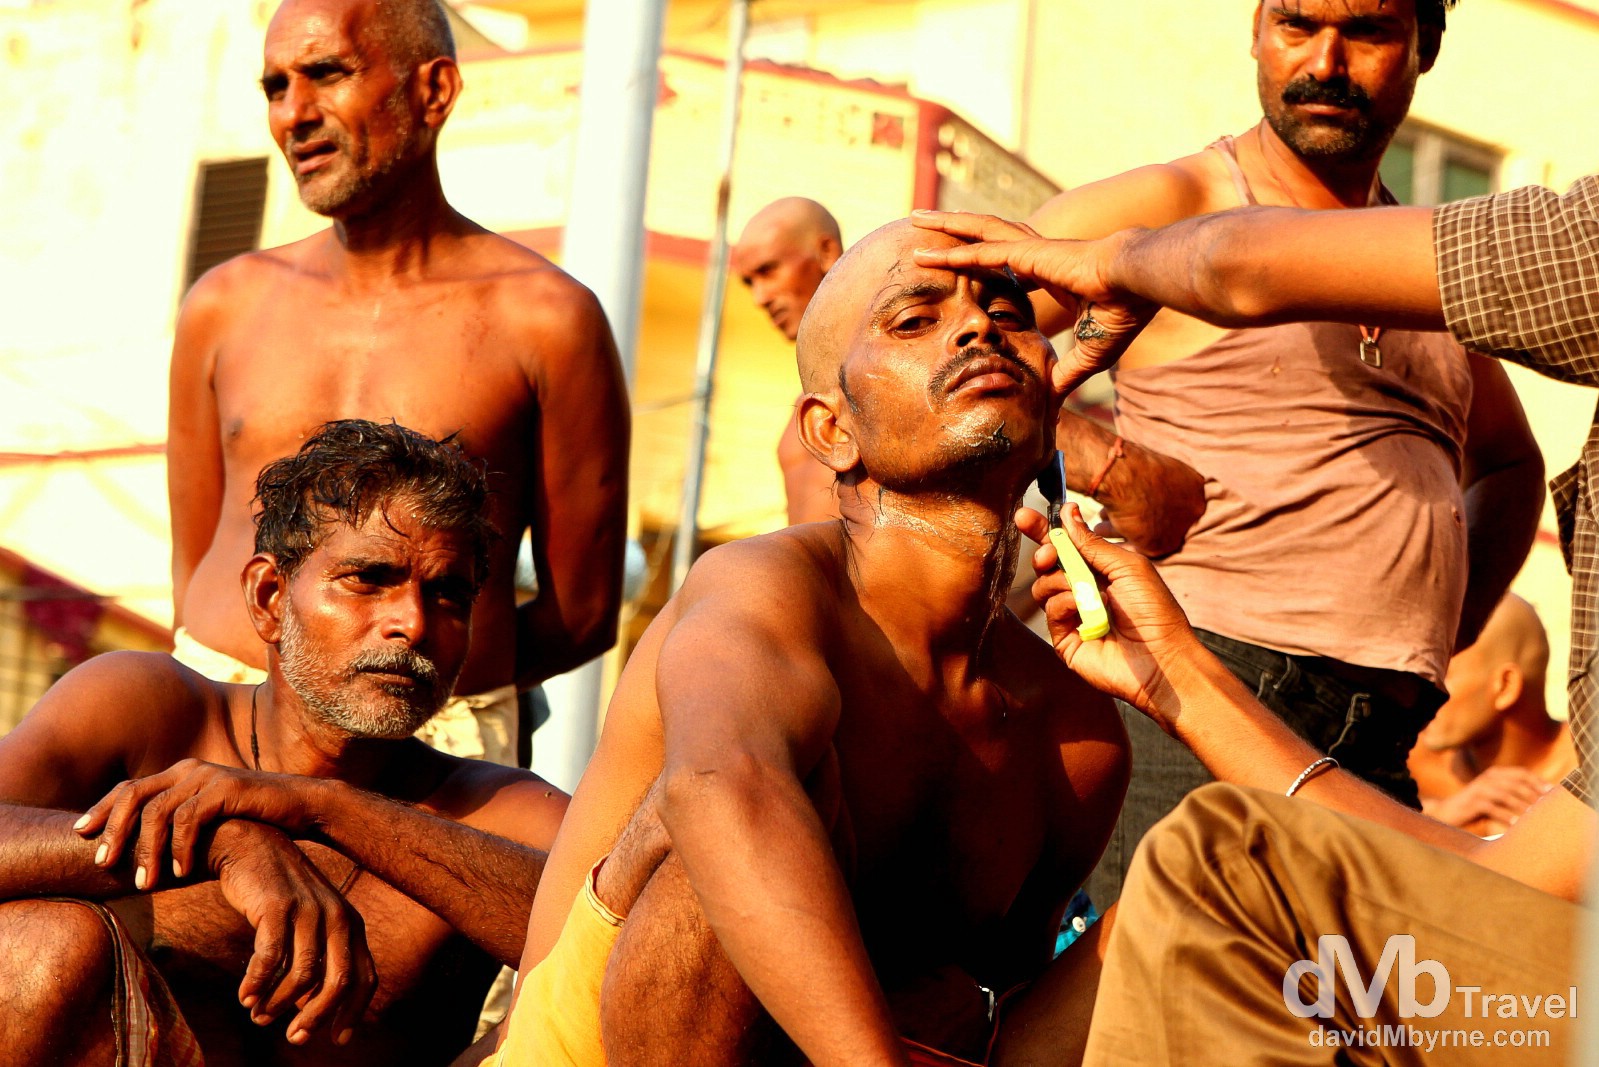 Getting a shave on the steps of a ghat by the Ganges River in Varanasi, Uttar Pradesh, India. October 13th 2012.